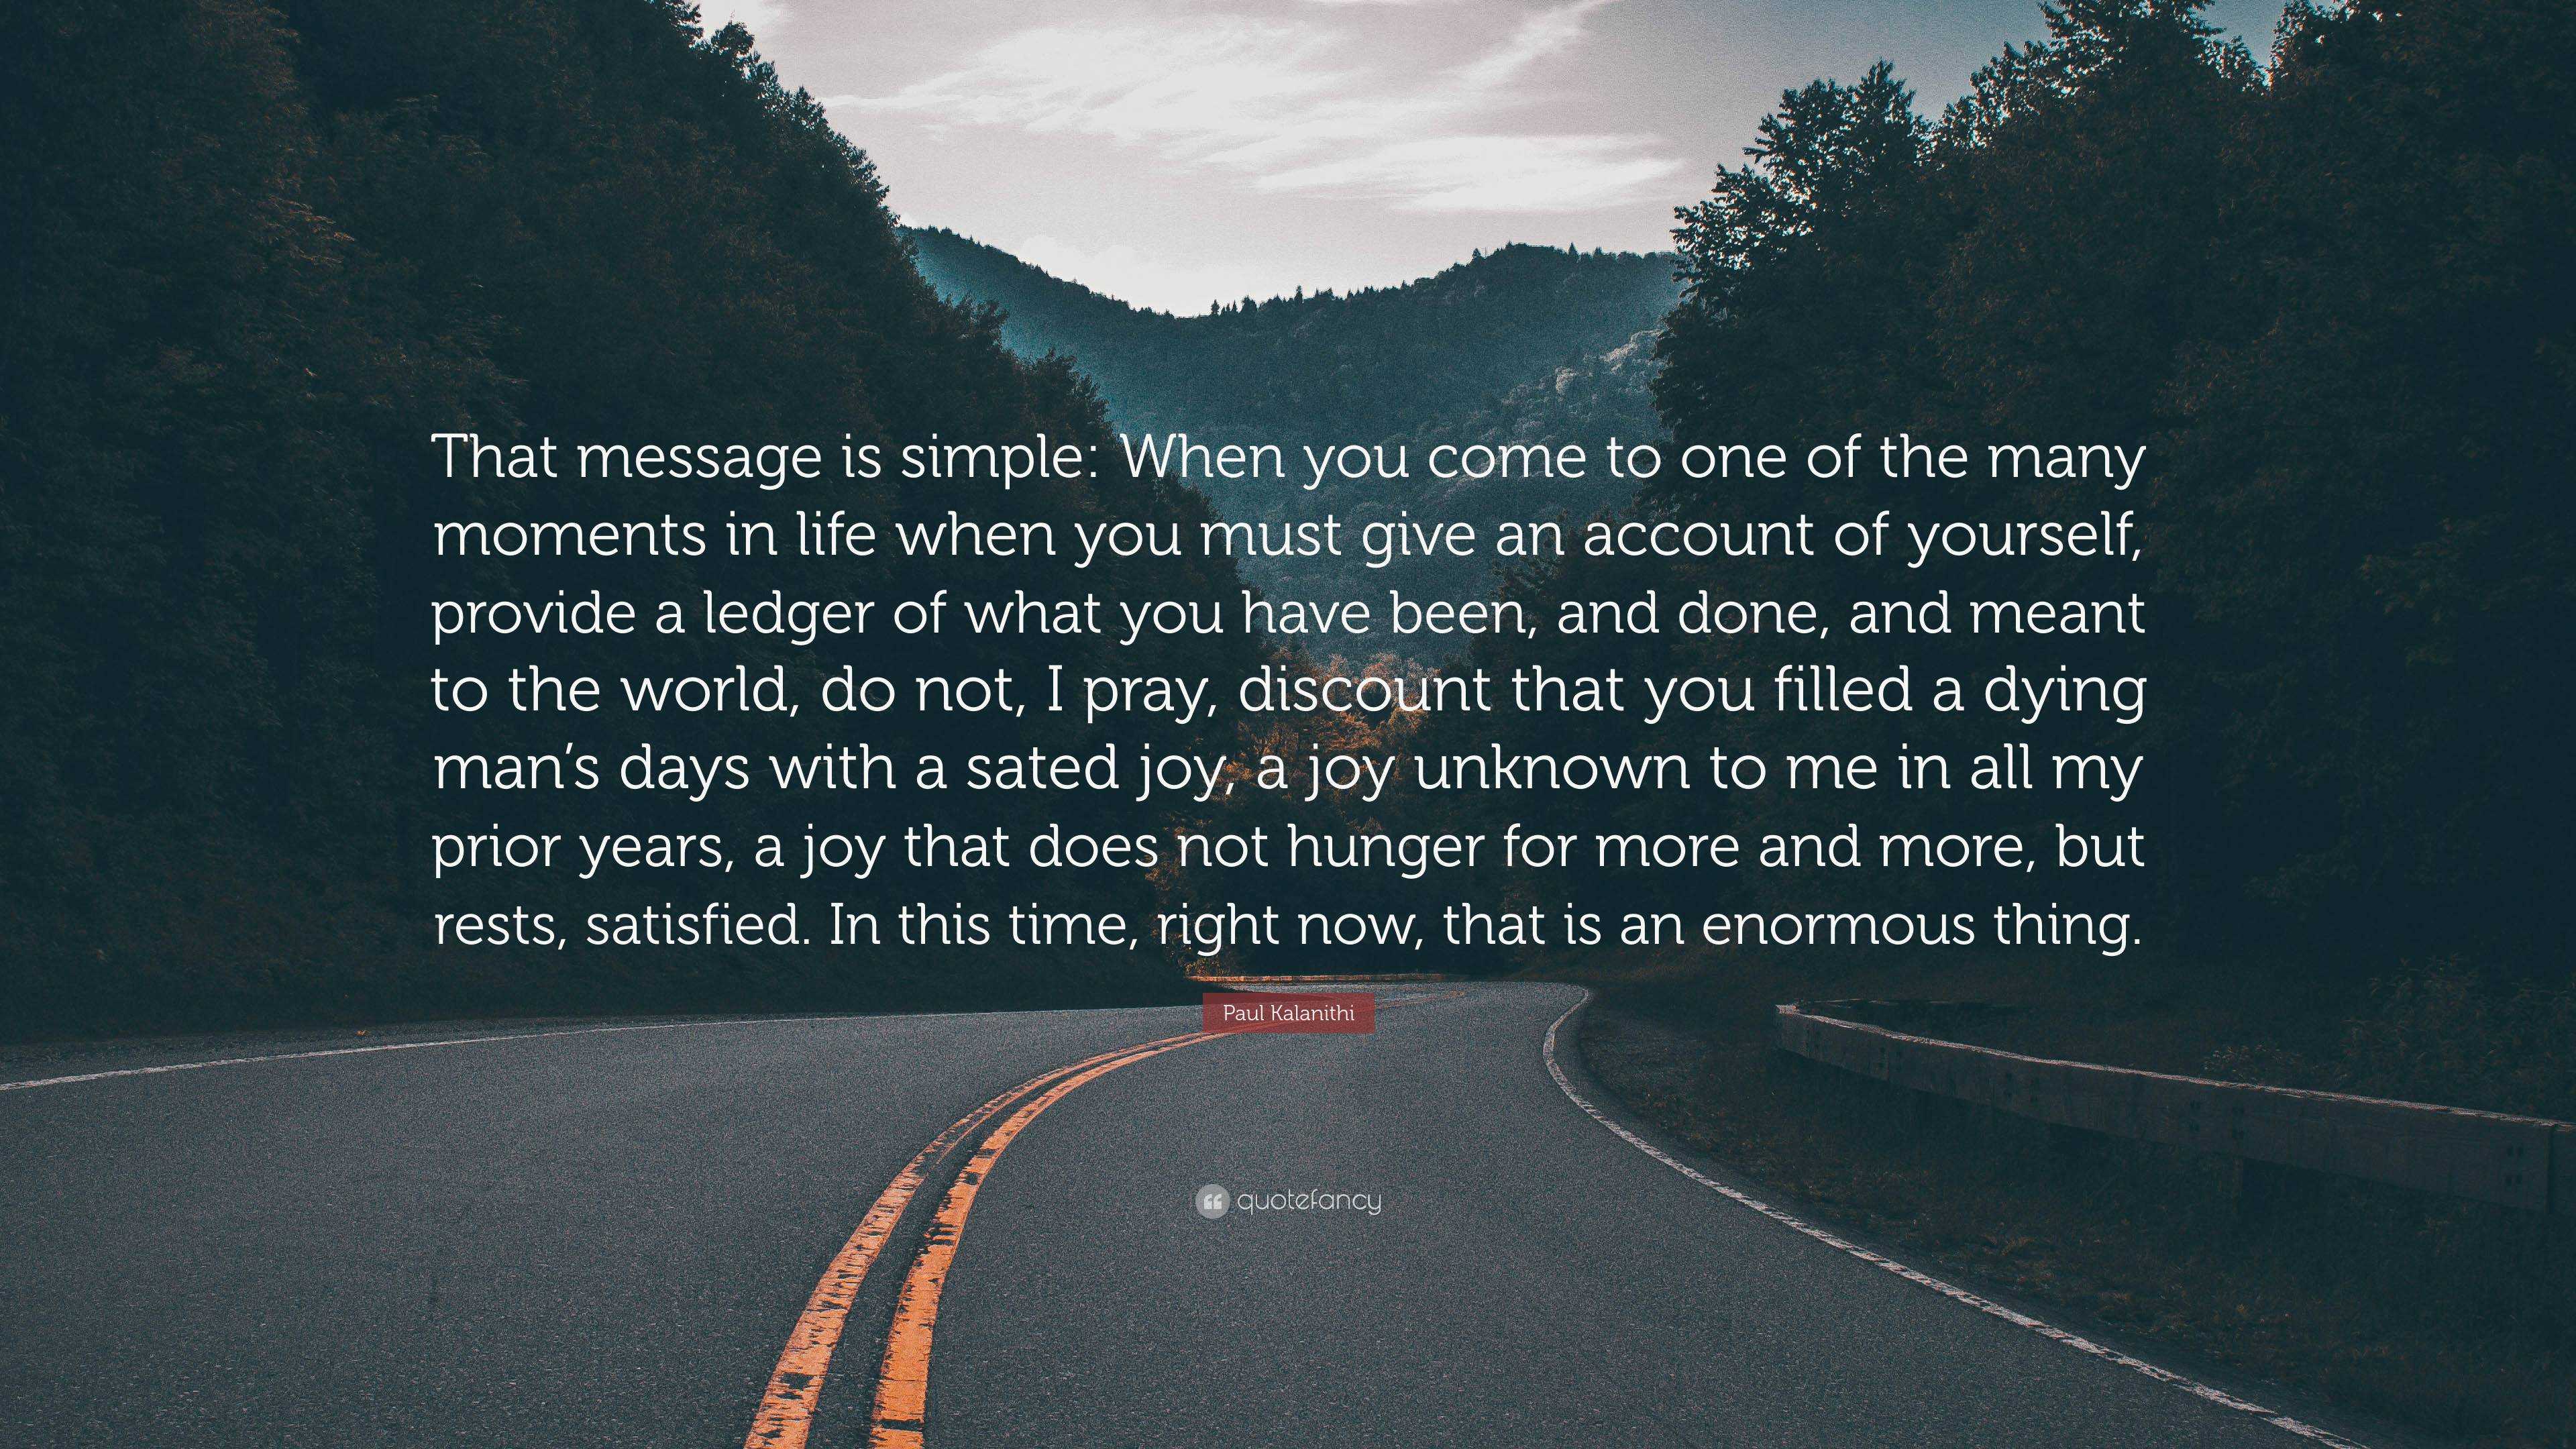 Paul Kalanithi Quote: “That message is simple: When you come to one of